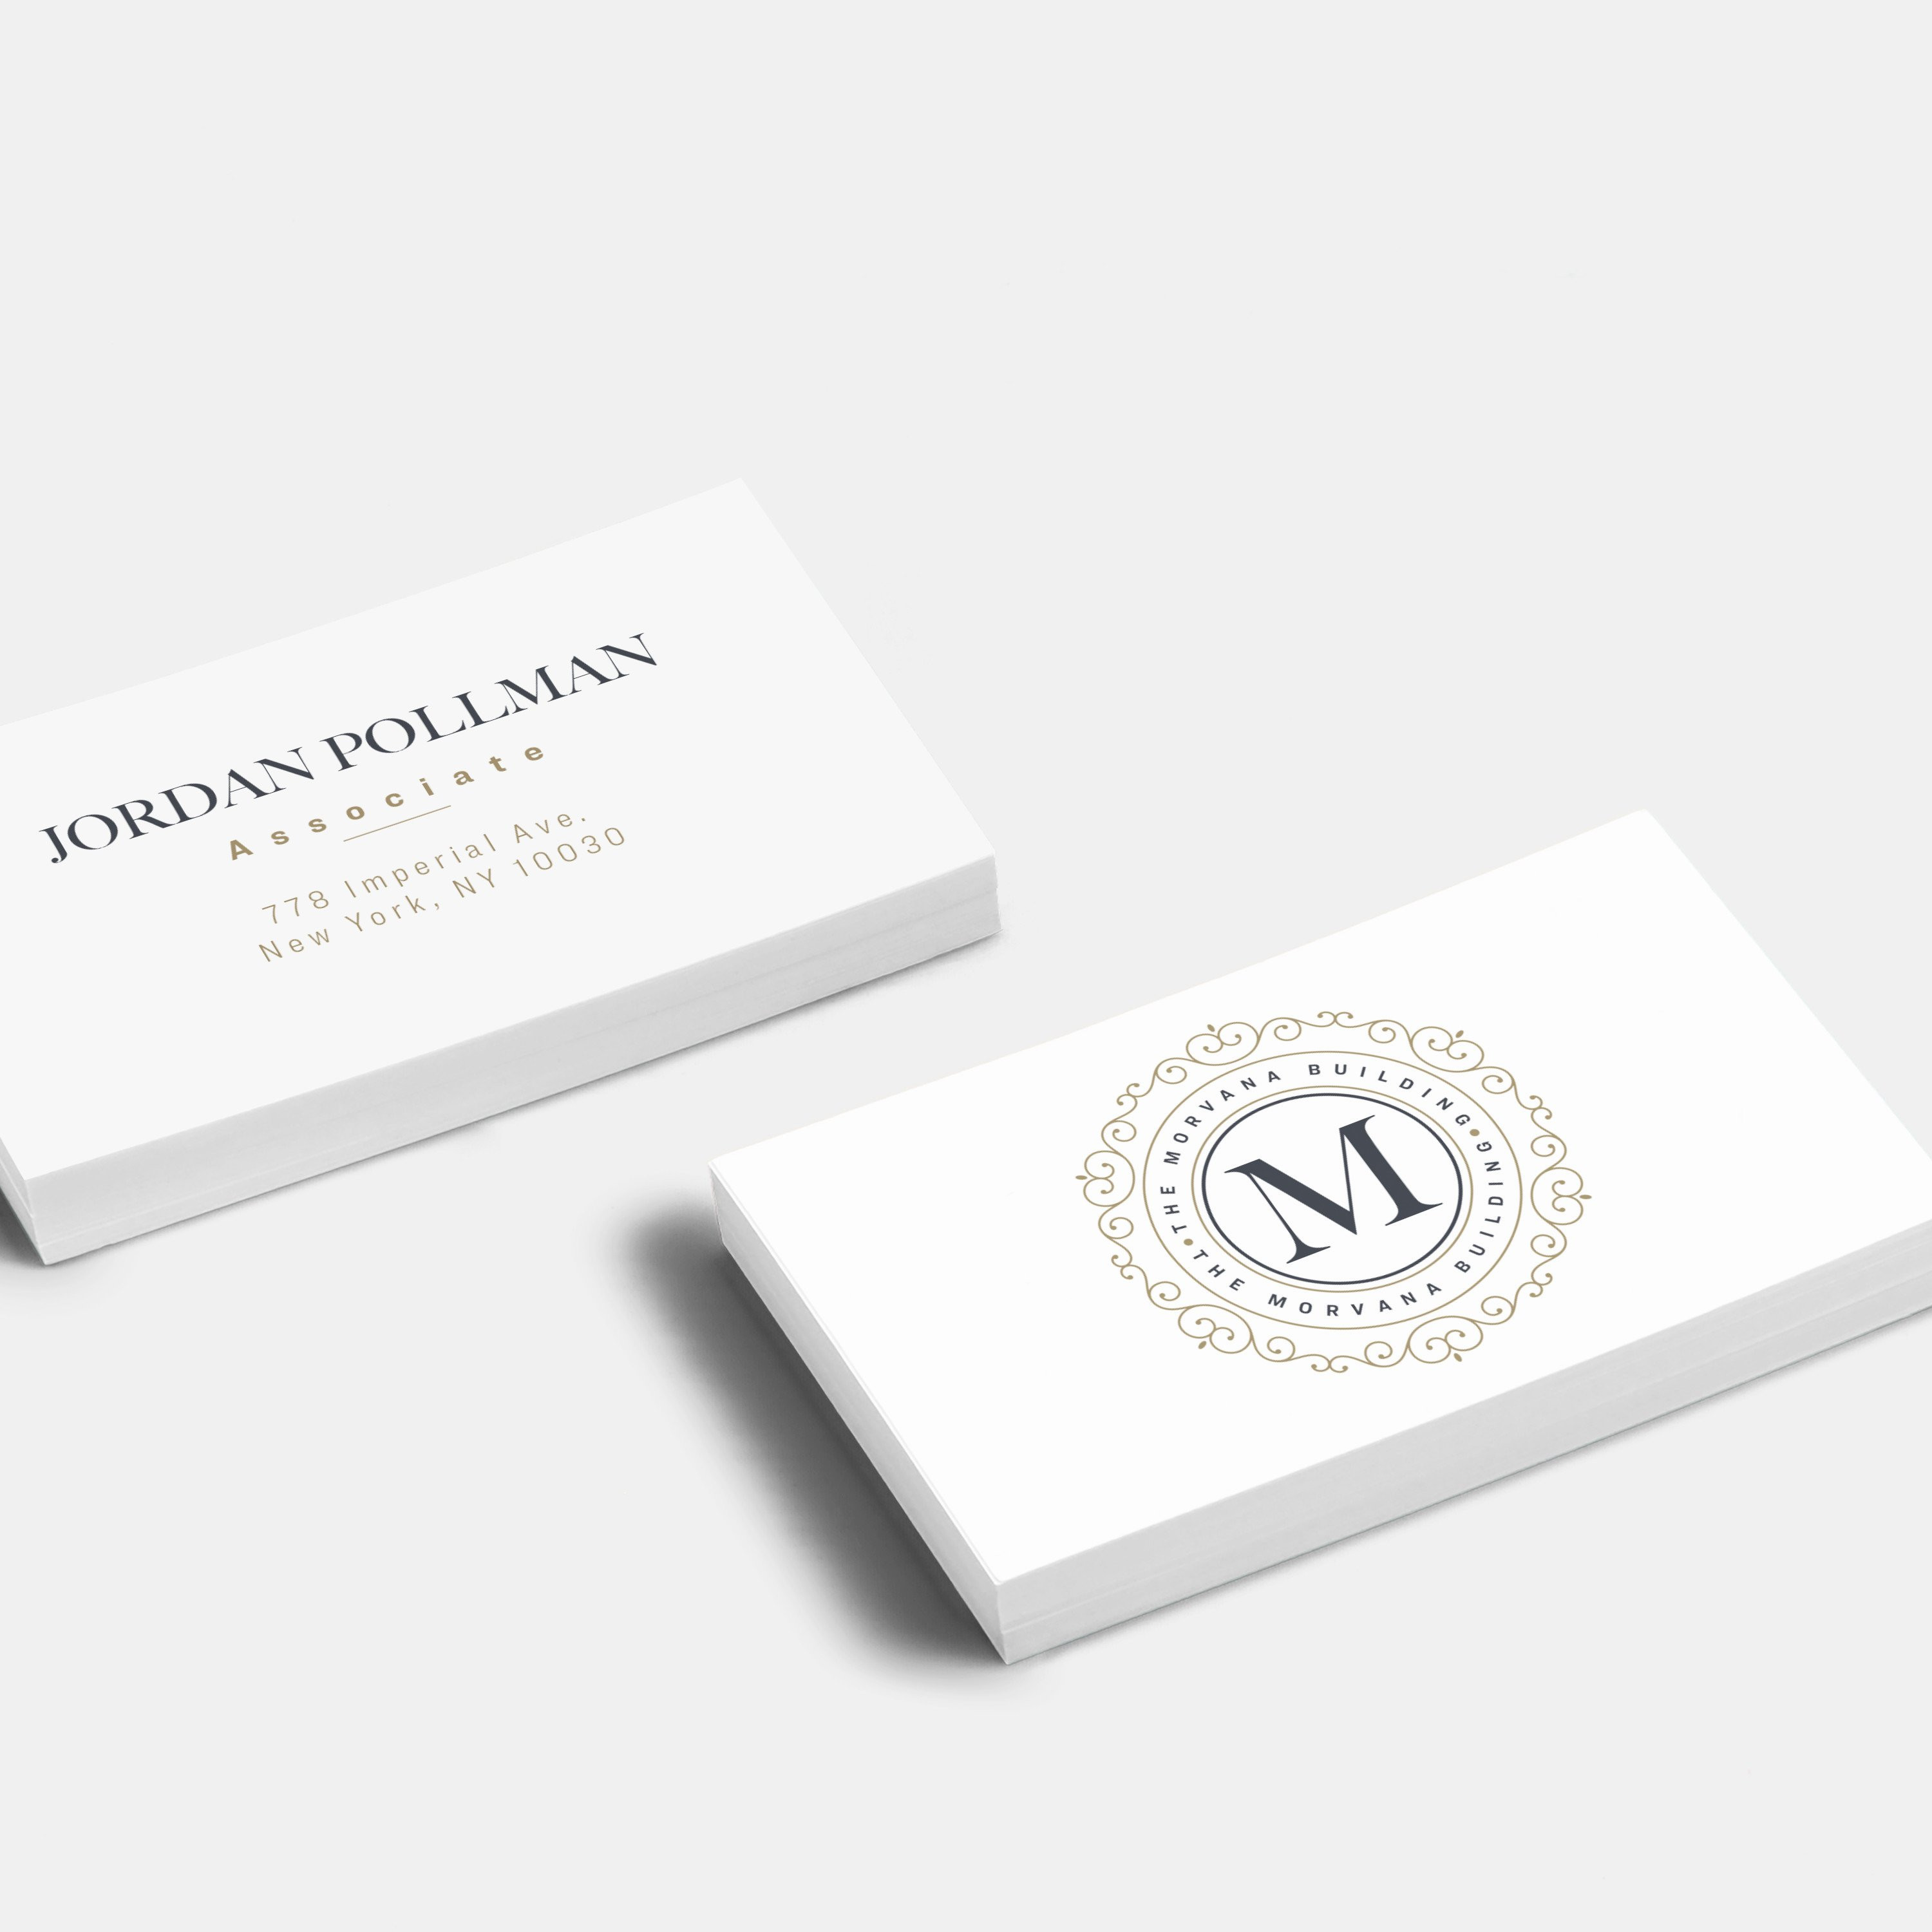 avery business card template luxury avery clean edge business cards true print matte two sided of avery business card template 1